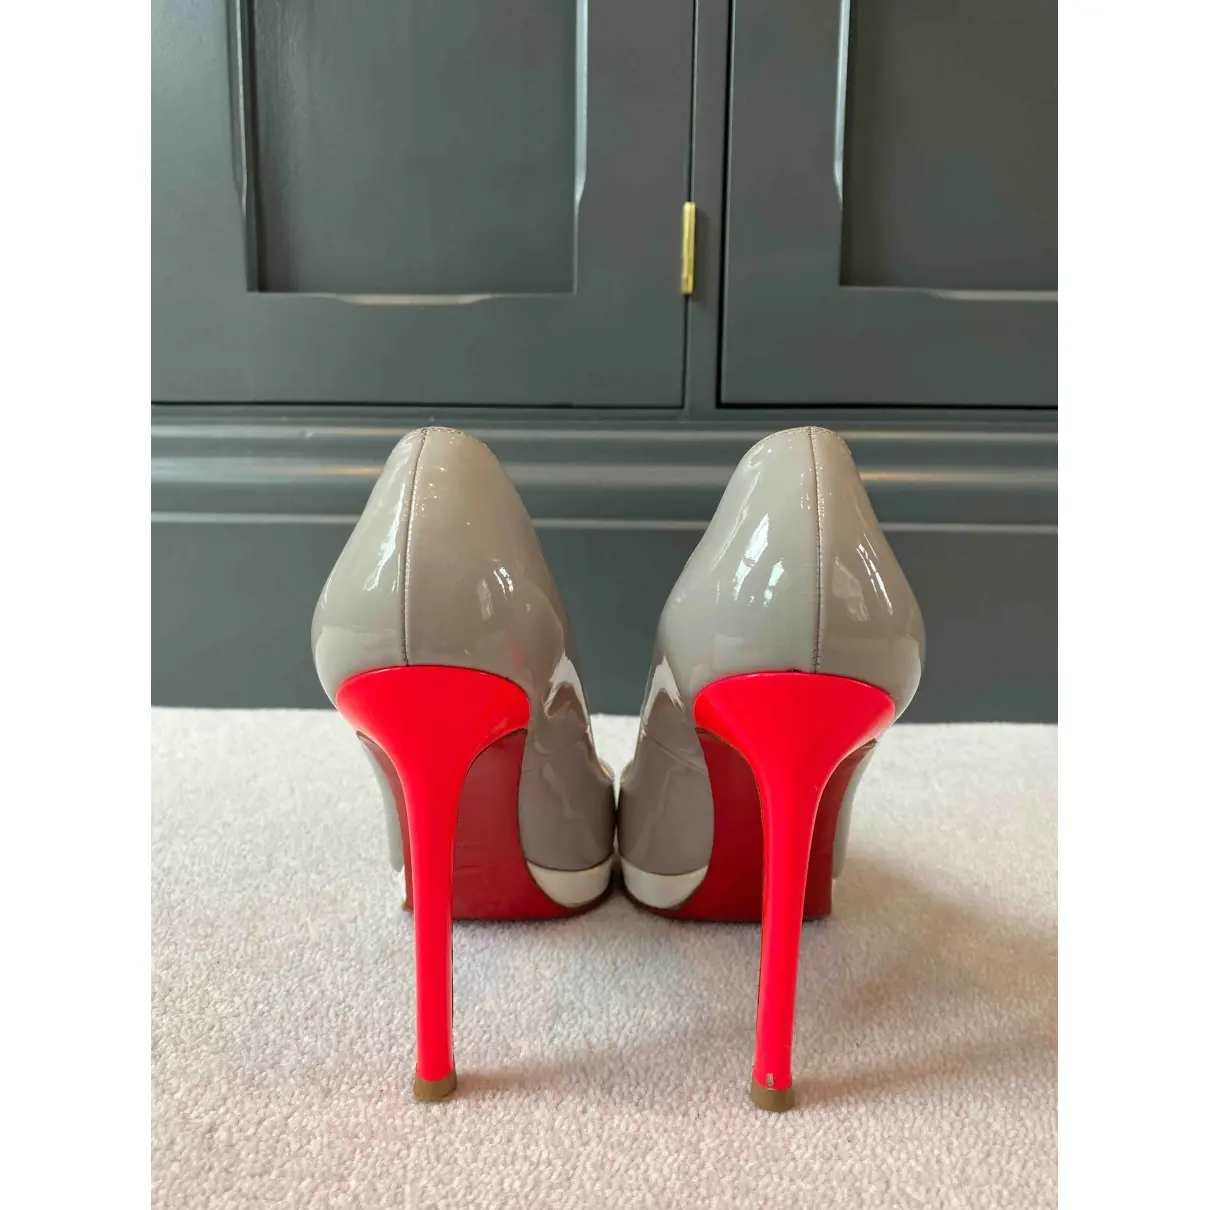 Pigalle Plato patent leather heels Christian Louboutin